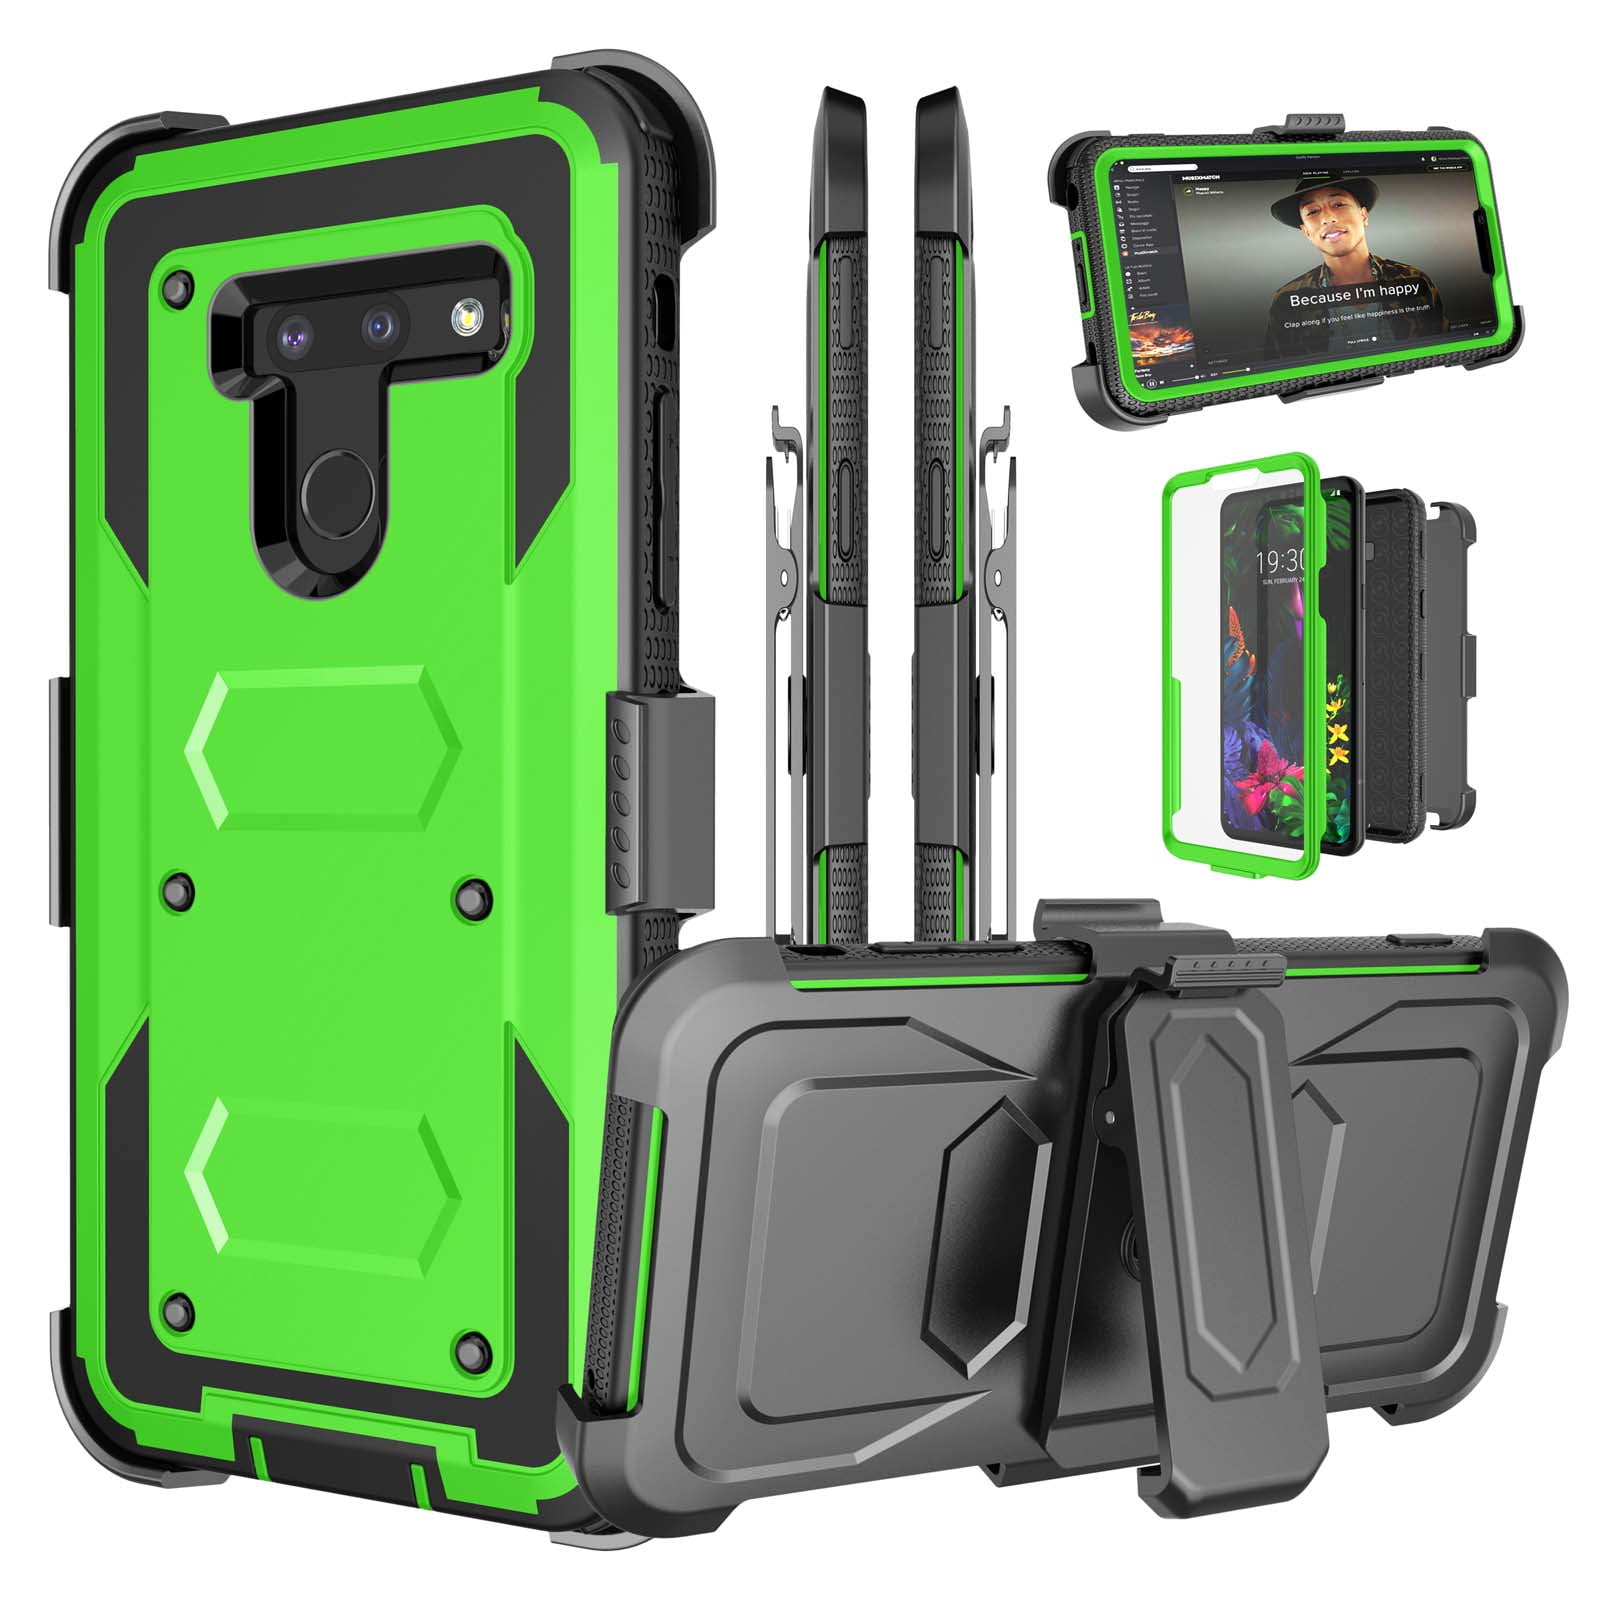 6.1" 2019 LG G8 ThinQ Case， LG G8 Case Holster Belt, LG G8 ThinQ Clip, Njjex [Built-in Screen Protector] & Kickstand + Holster Belt Clip Carrying Armor Case Cover -Green